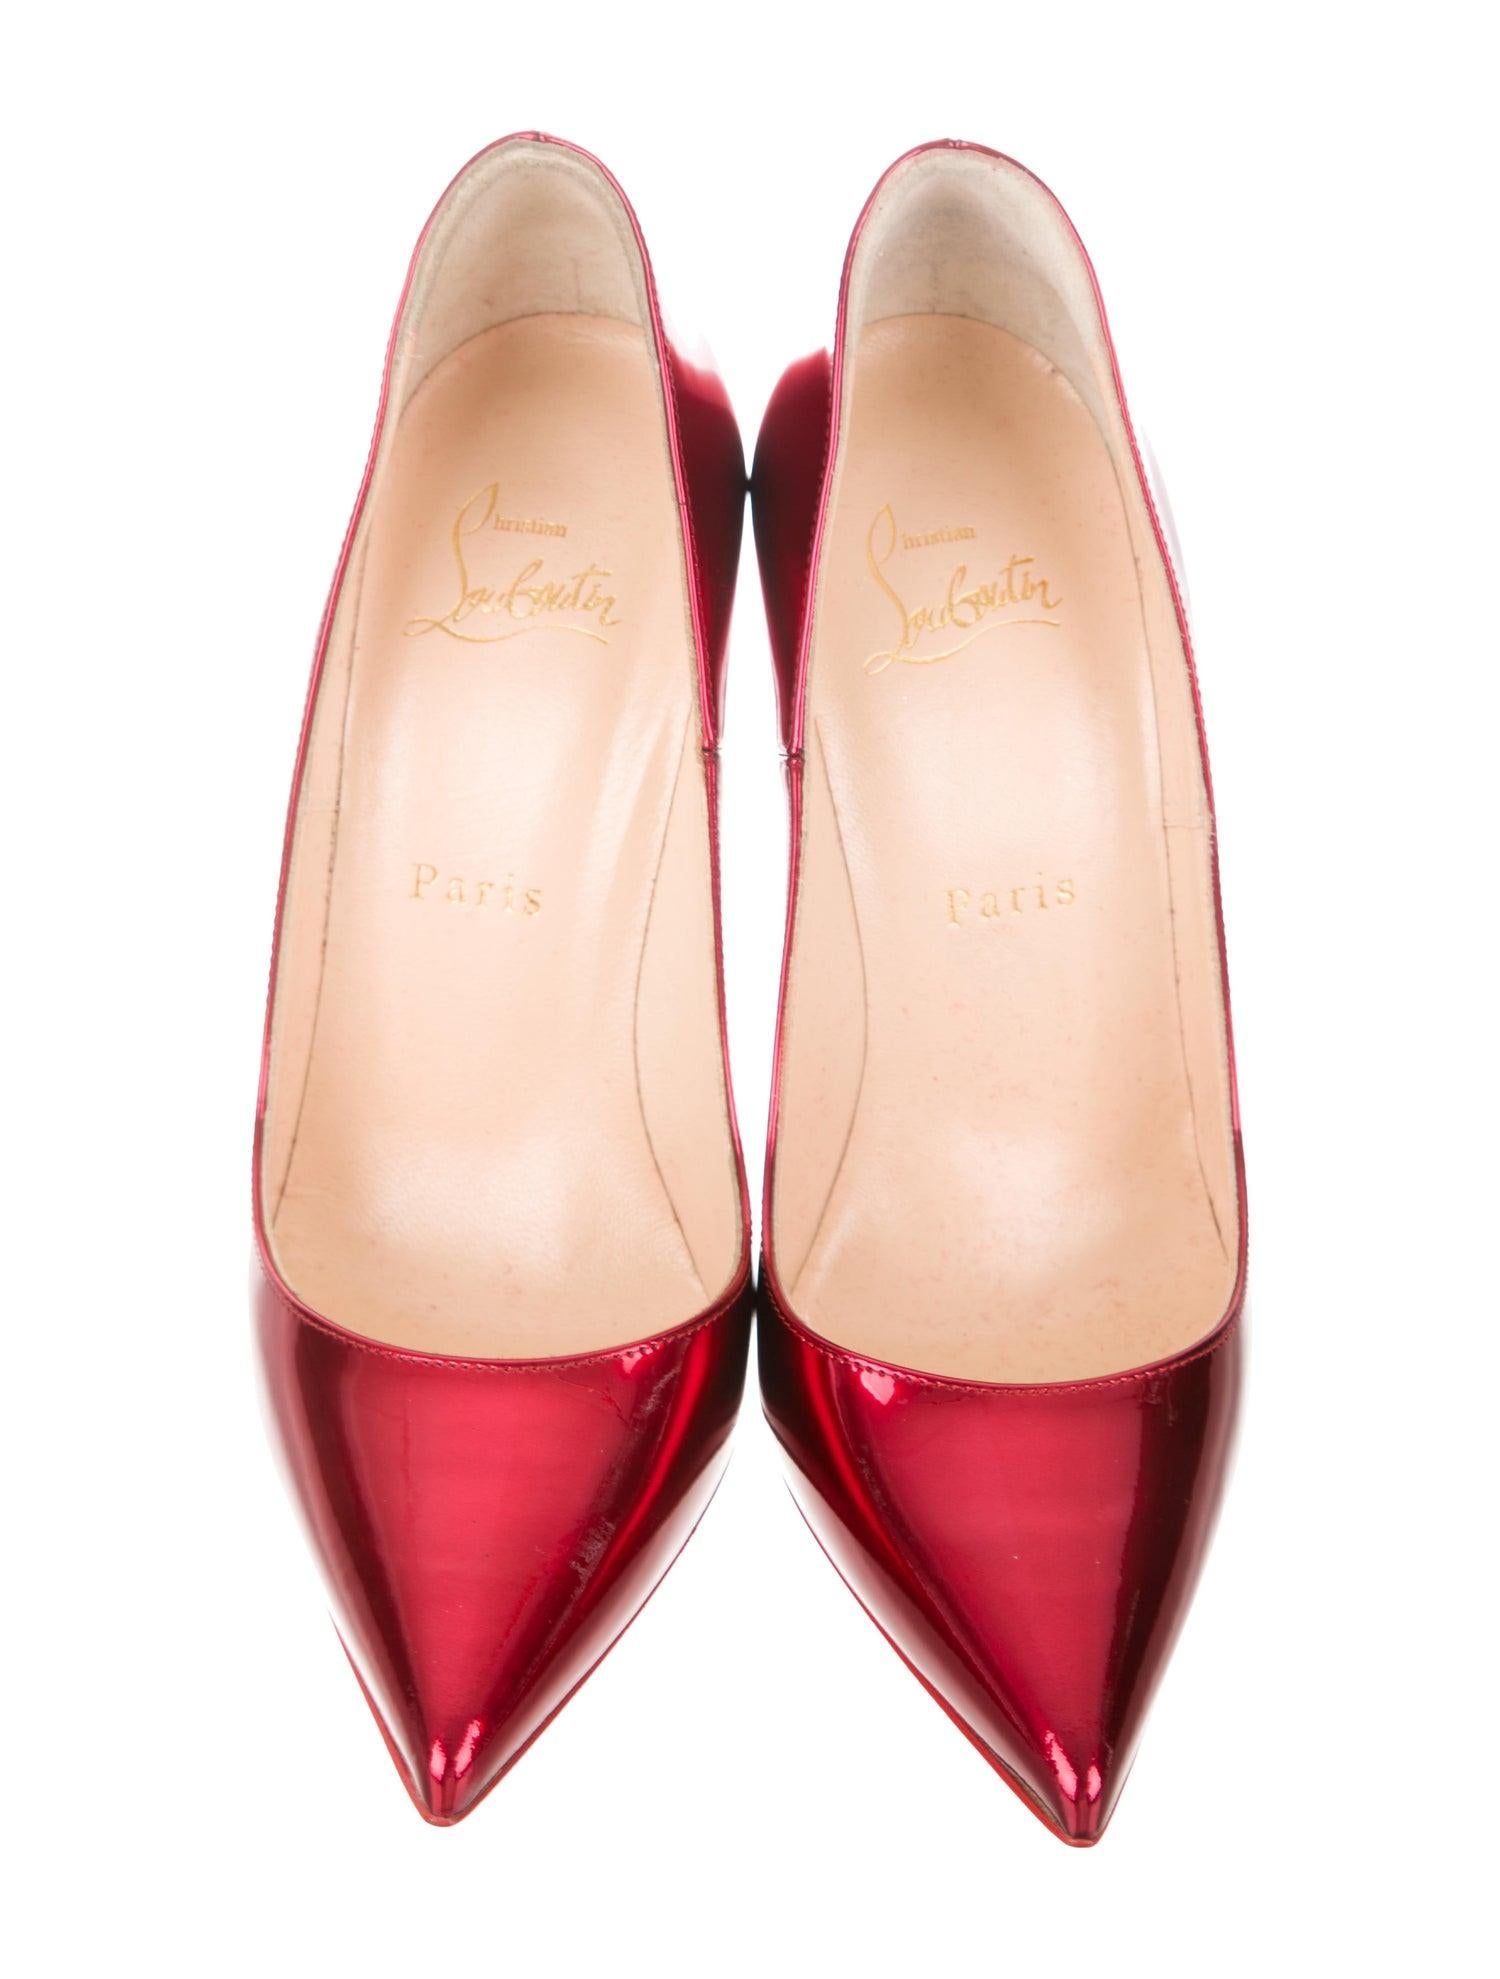 Christian Louboutin NEW Red Pigalle Patent Leather Pumps Heels

Size IT 37
Patent Leather
Slip on
Made in Italy
Heel height 4.75